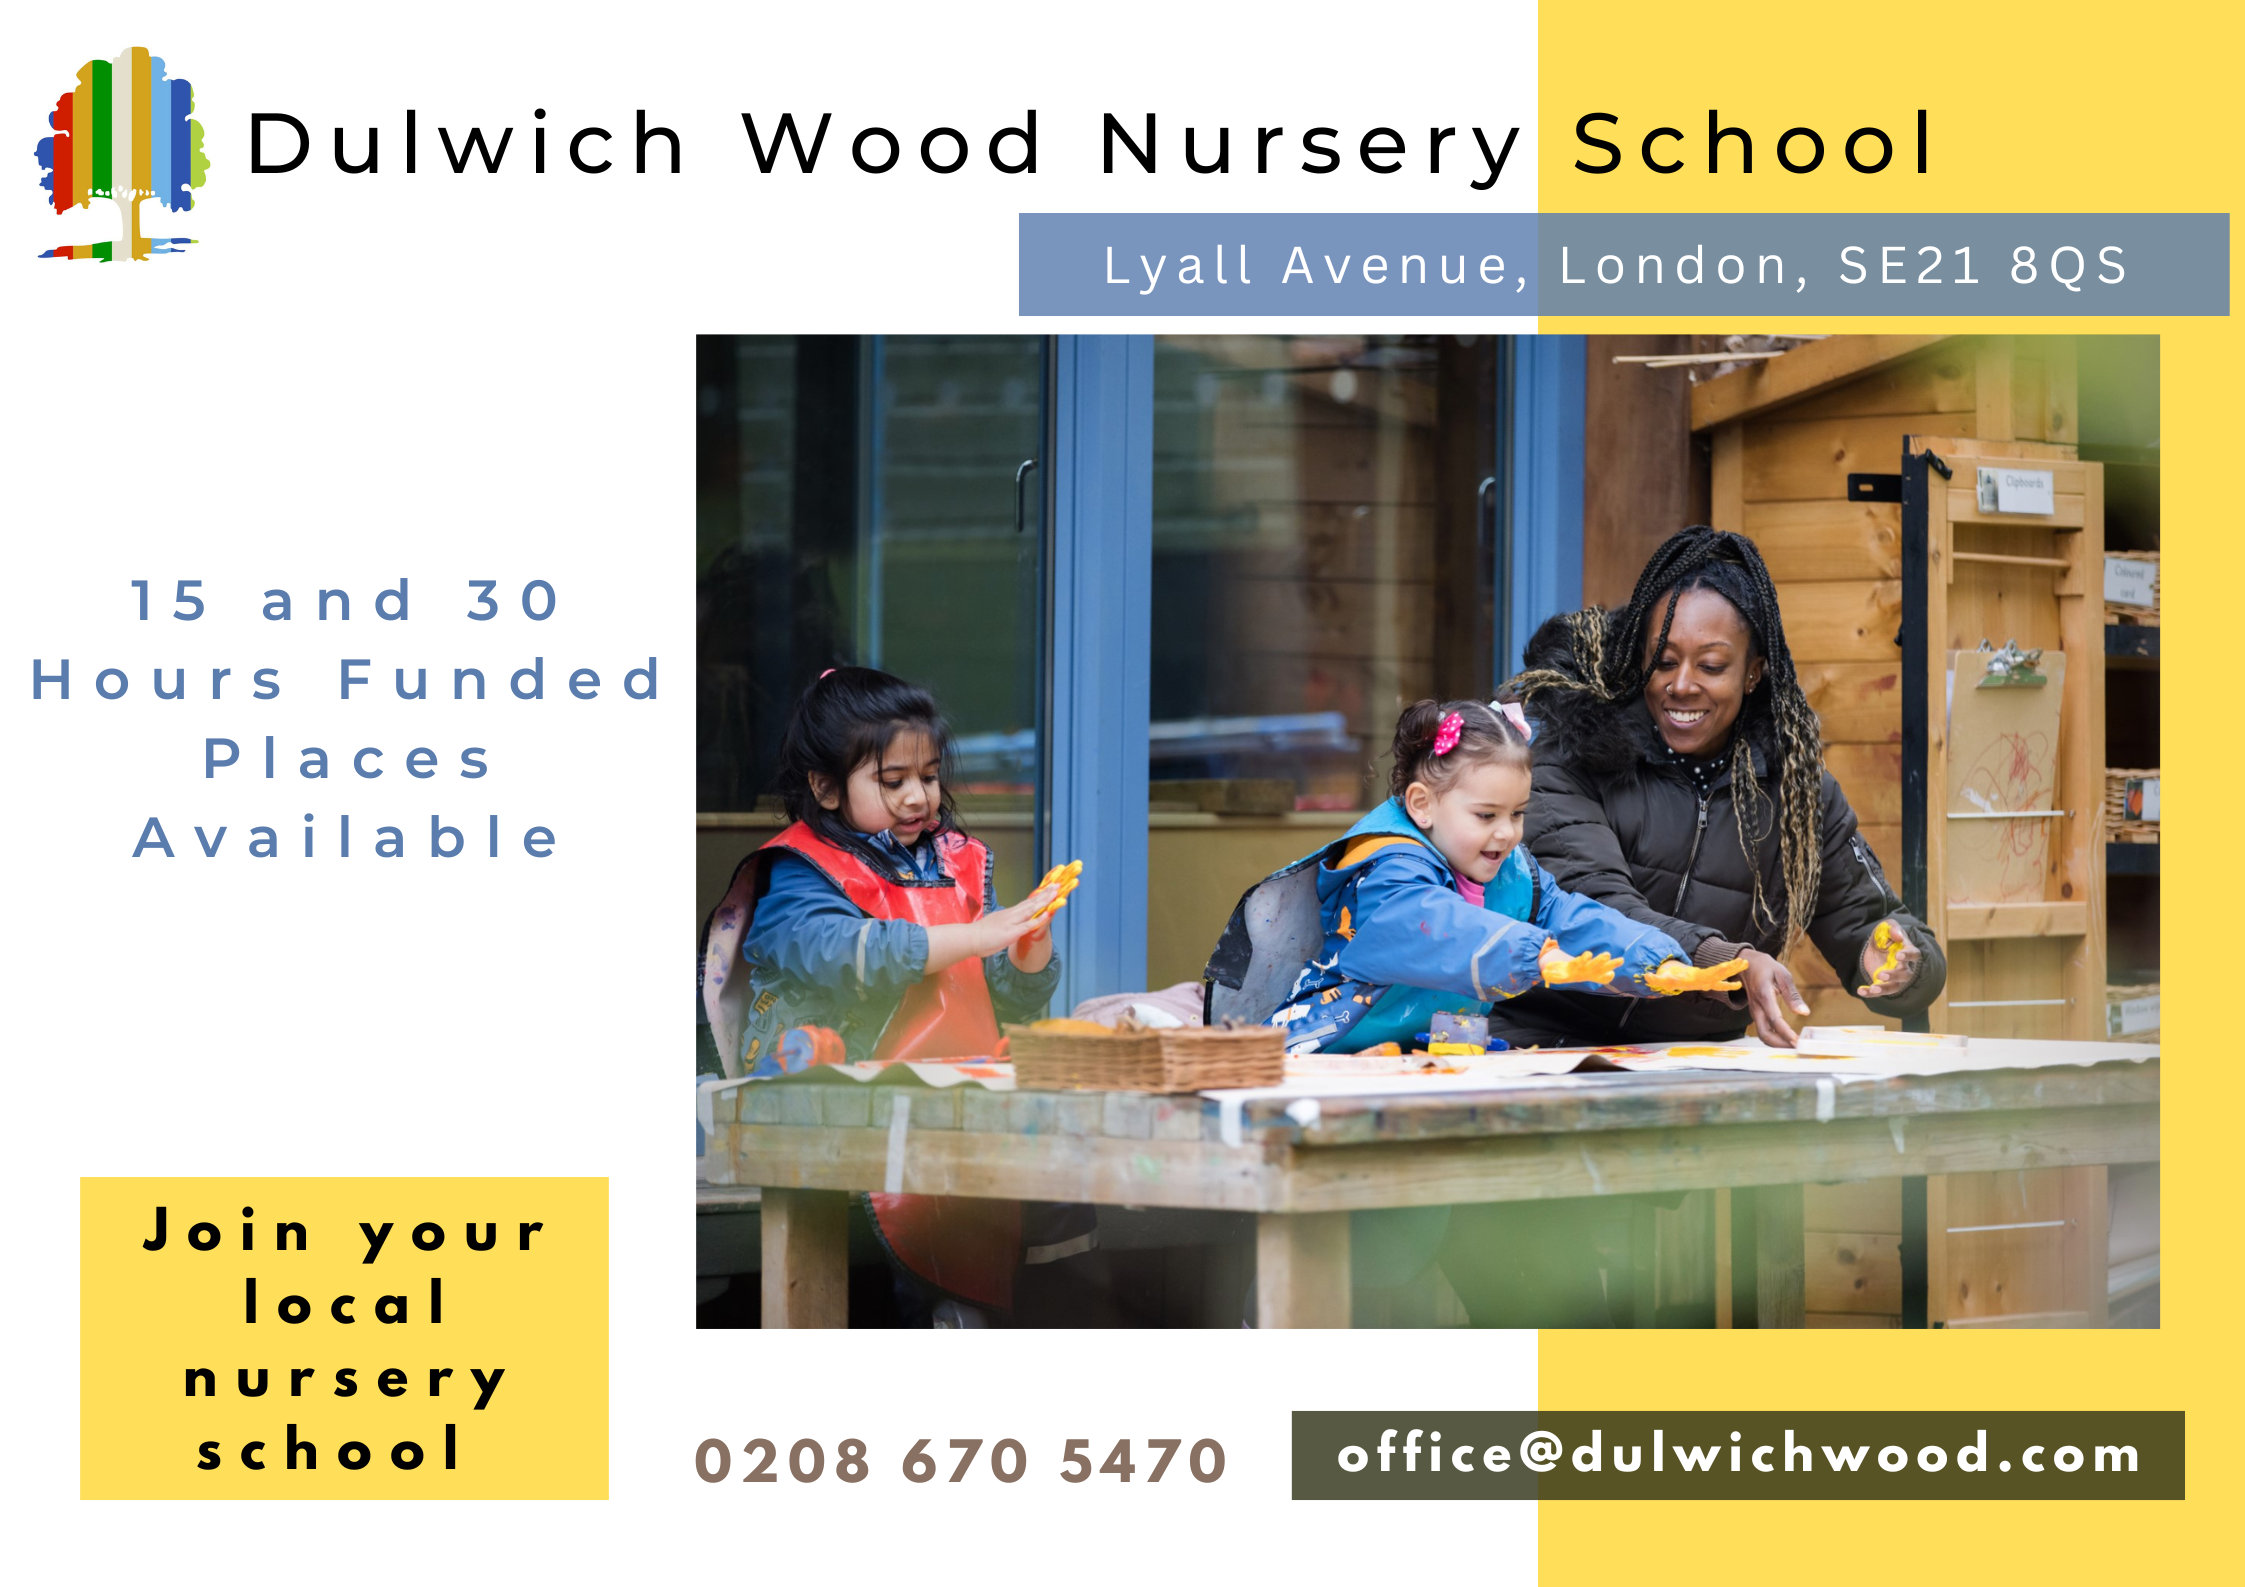 Dulwich Wood Nursery School Lyall Avenue, London, SE21 8QS 15 and 30 Hours Funded Places Available Join your local nursery school 0208 670 5470 office@dulwichwood.com